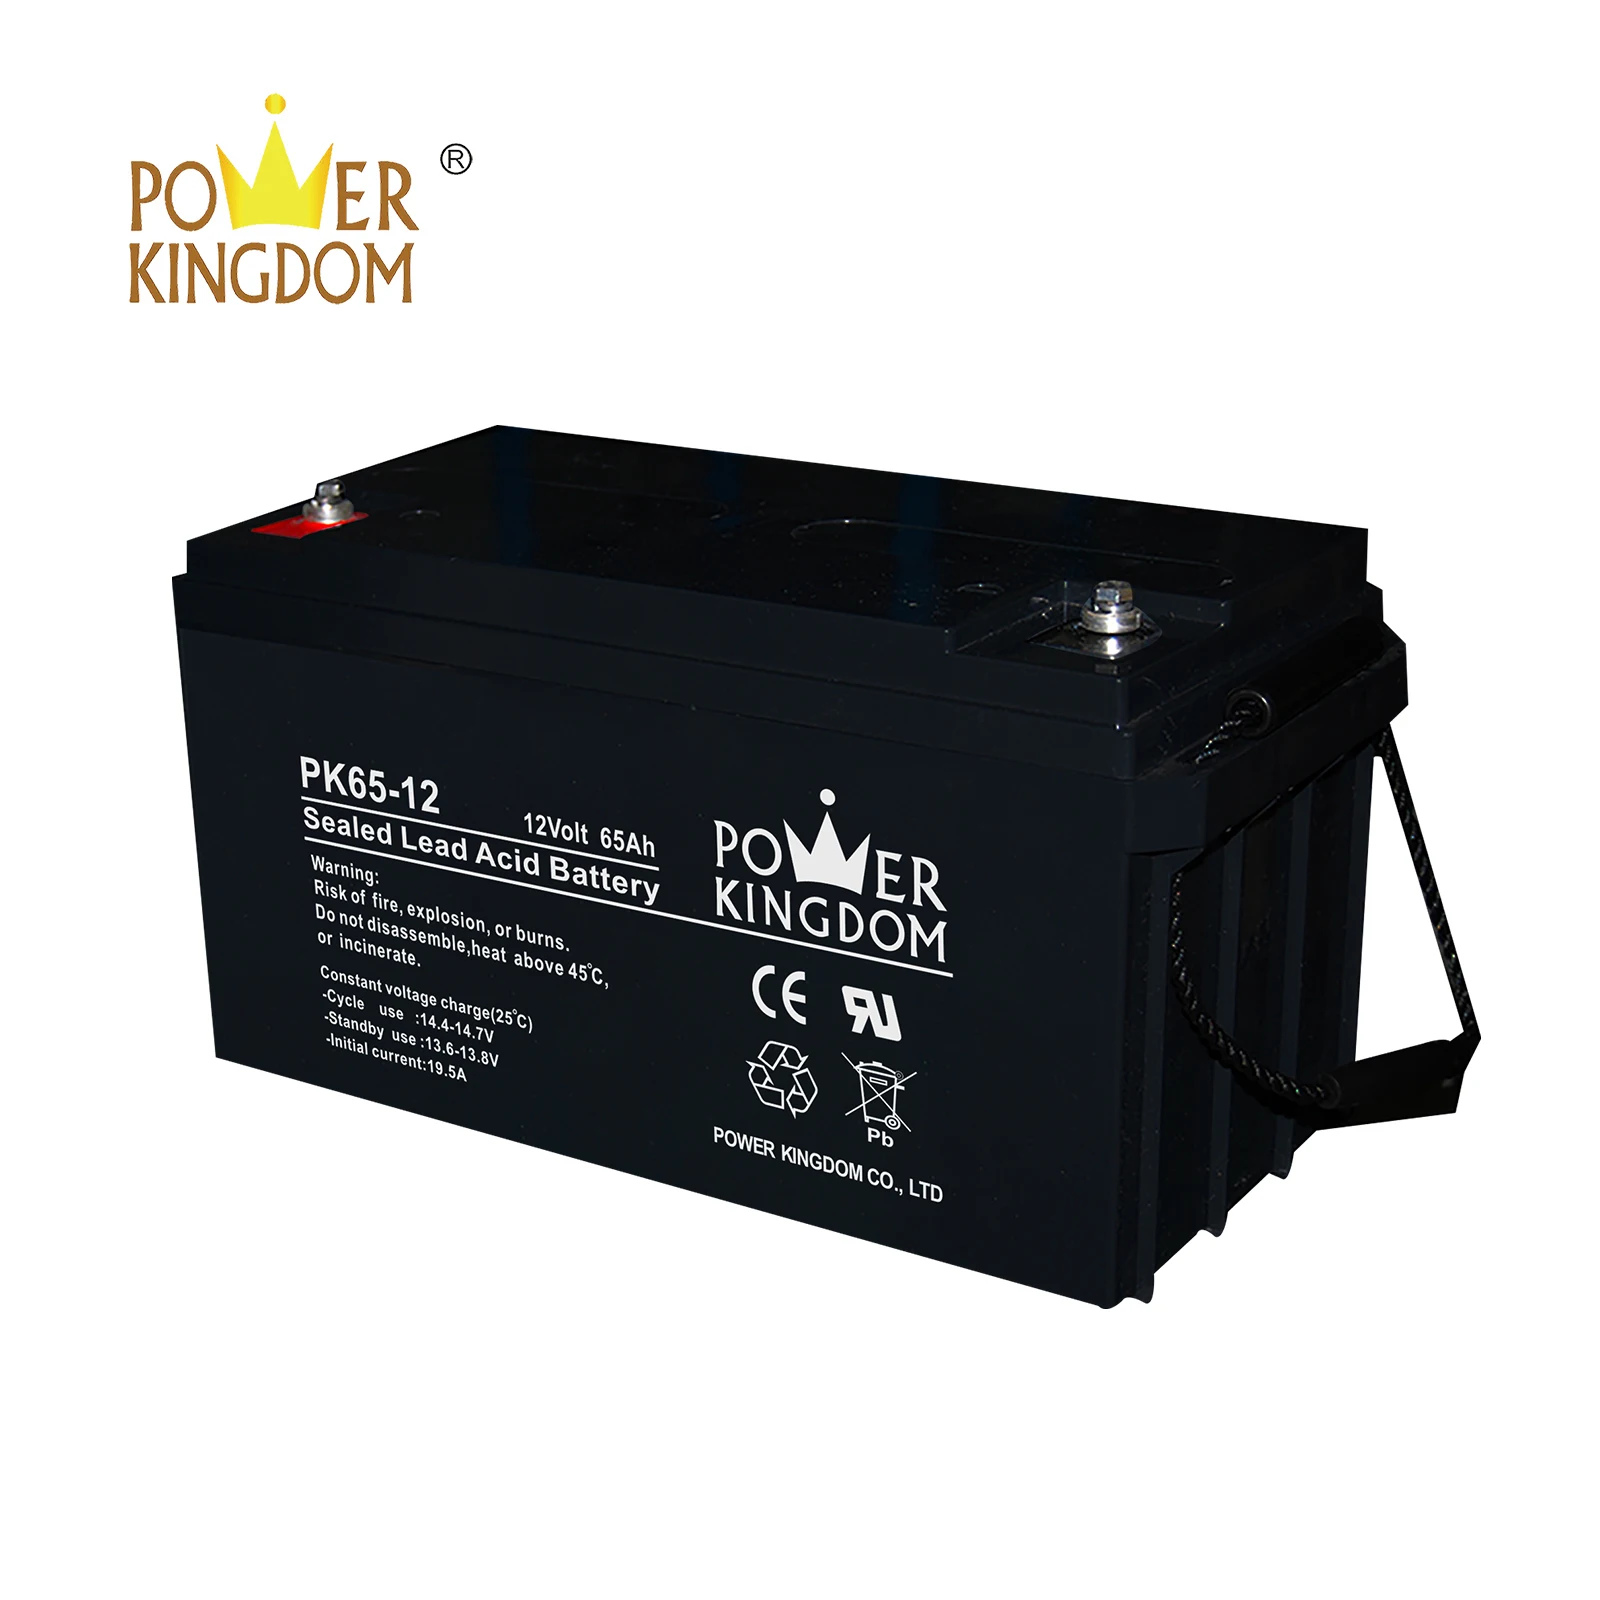 Power Kingdom agm battery technology factory Power tools